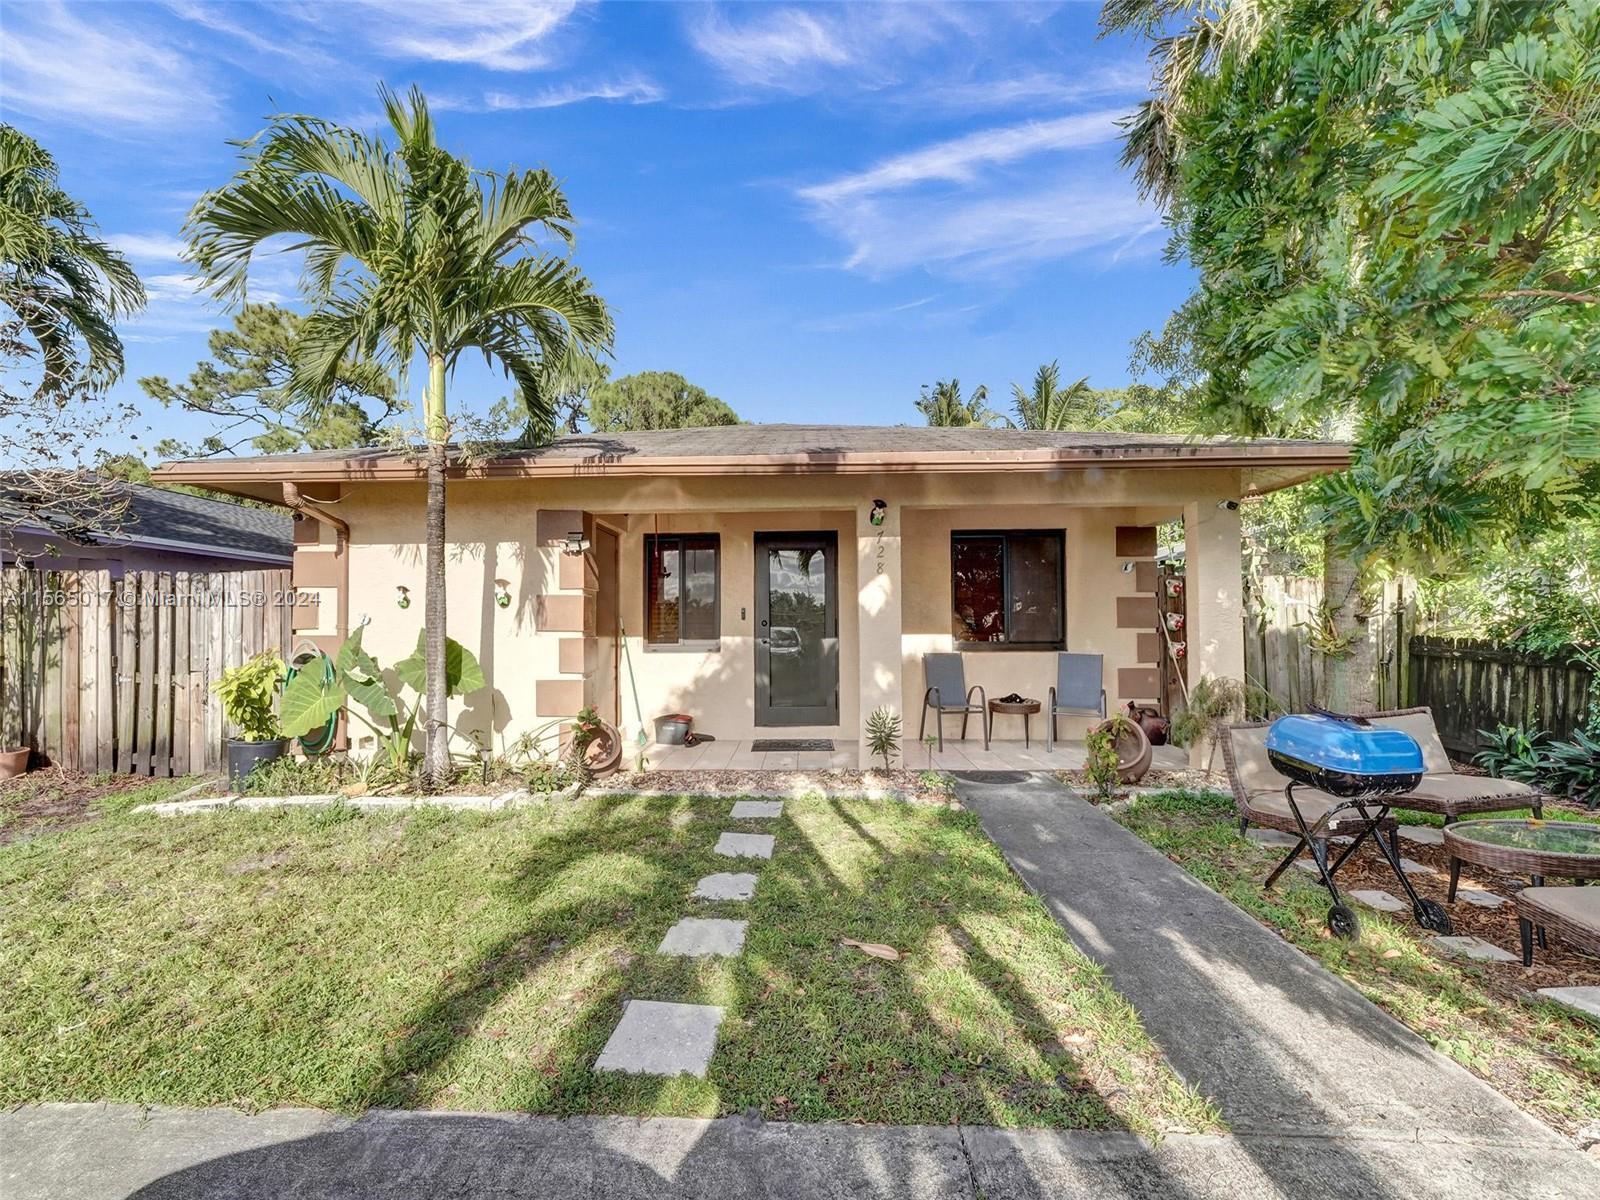 Welcome to your new home in Riverland, Fort Lauderdale! This single-family residence offers upgrades